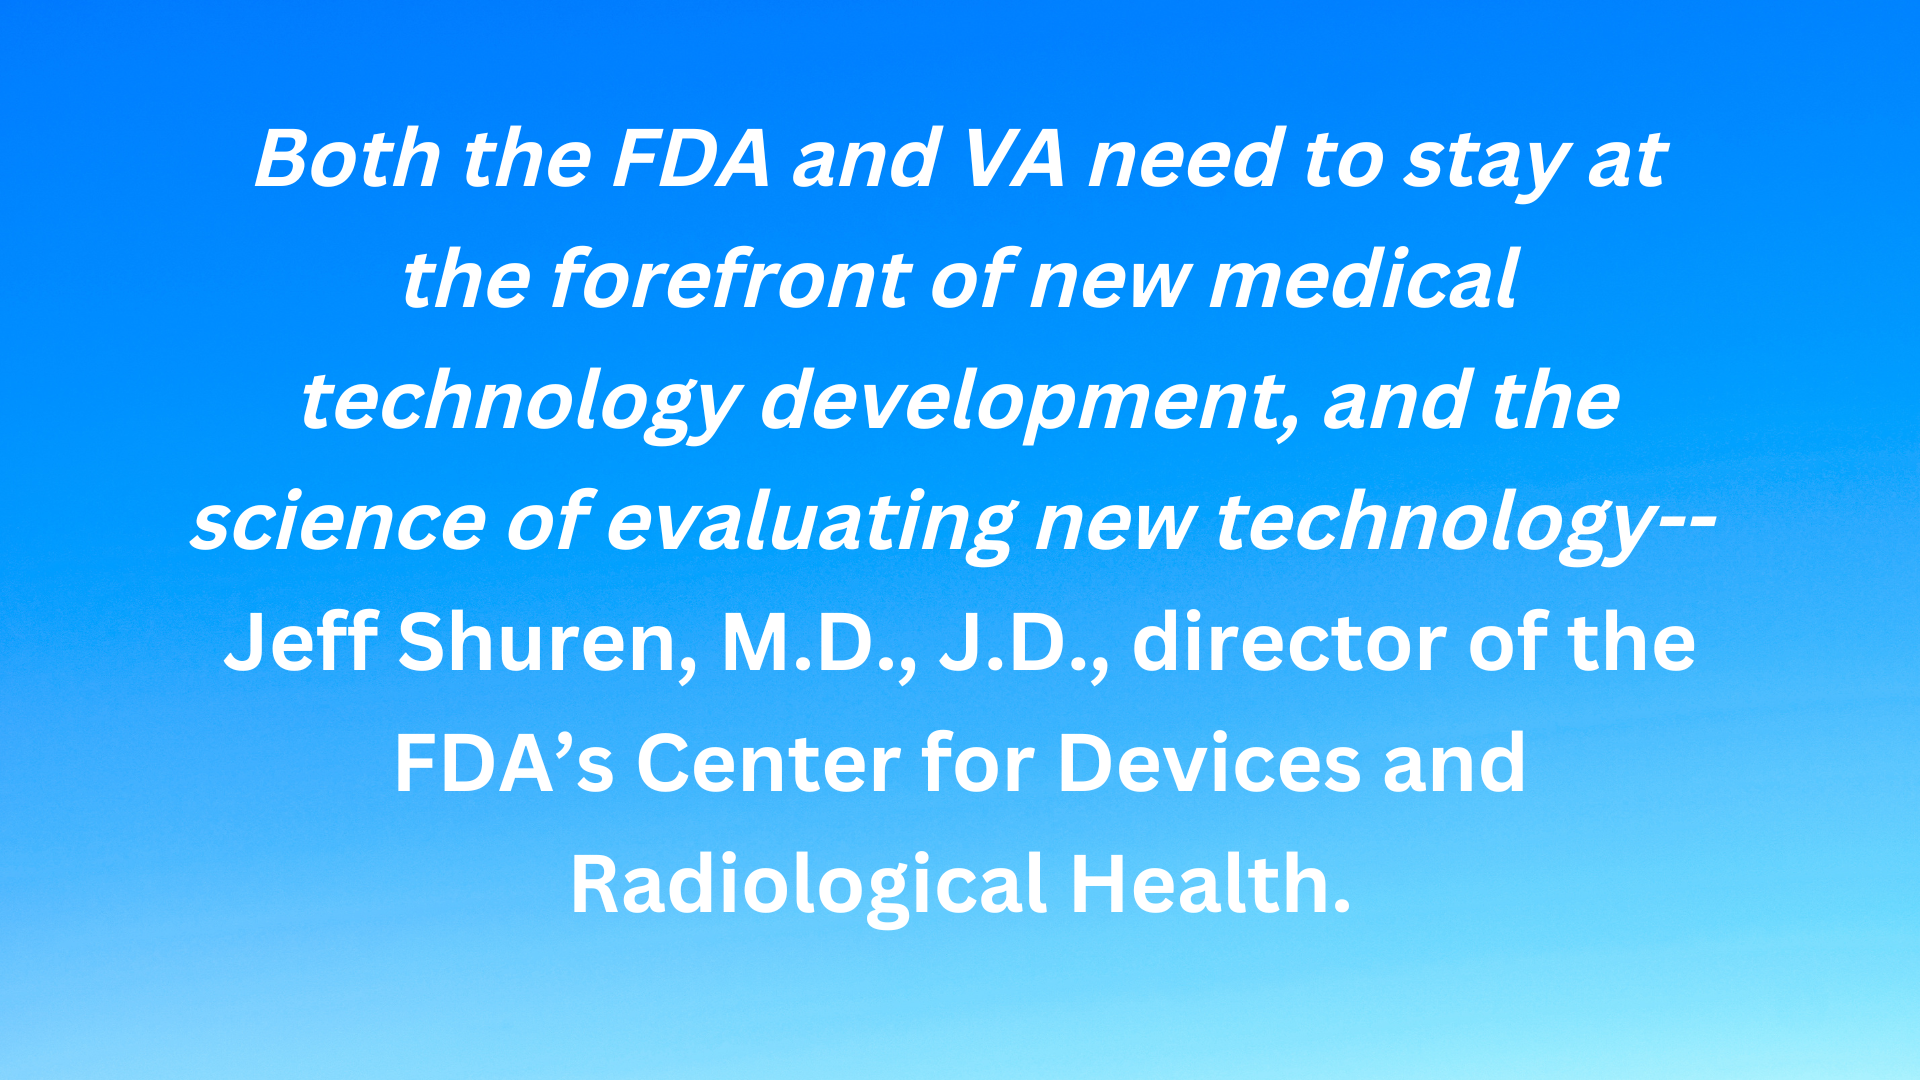 The U.S. FDA and the VHA announced a collaboration to help accelerate American medical device innovation to further improve and benefit public health.